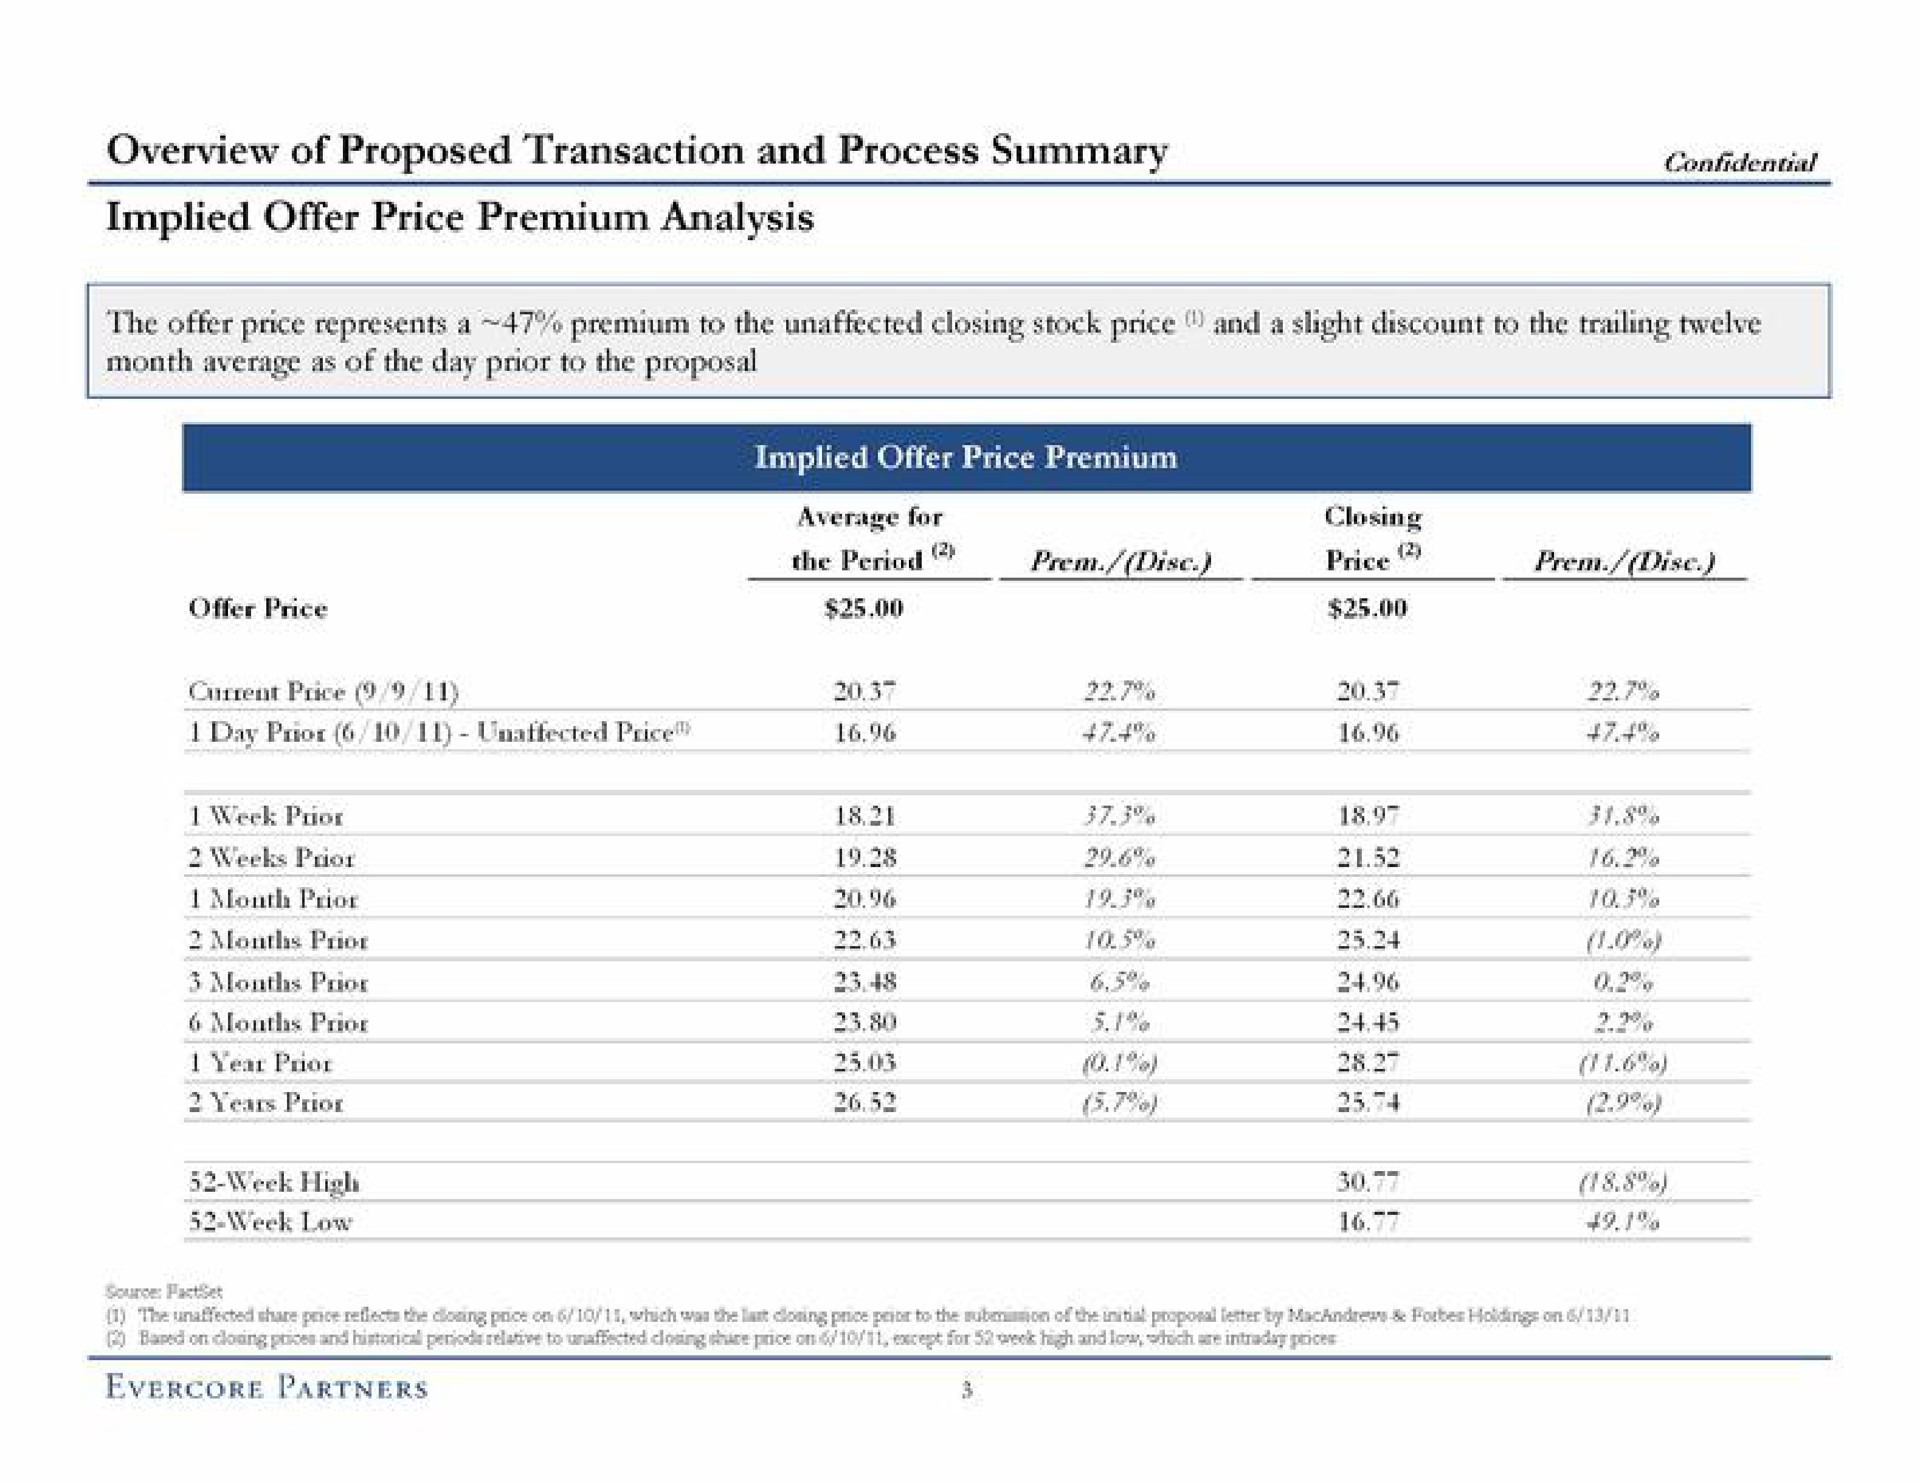 overview of proposed transaction and process summary nes implied offer price premium analysis weeks poot | Evercore